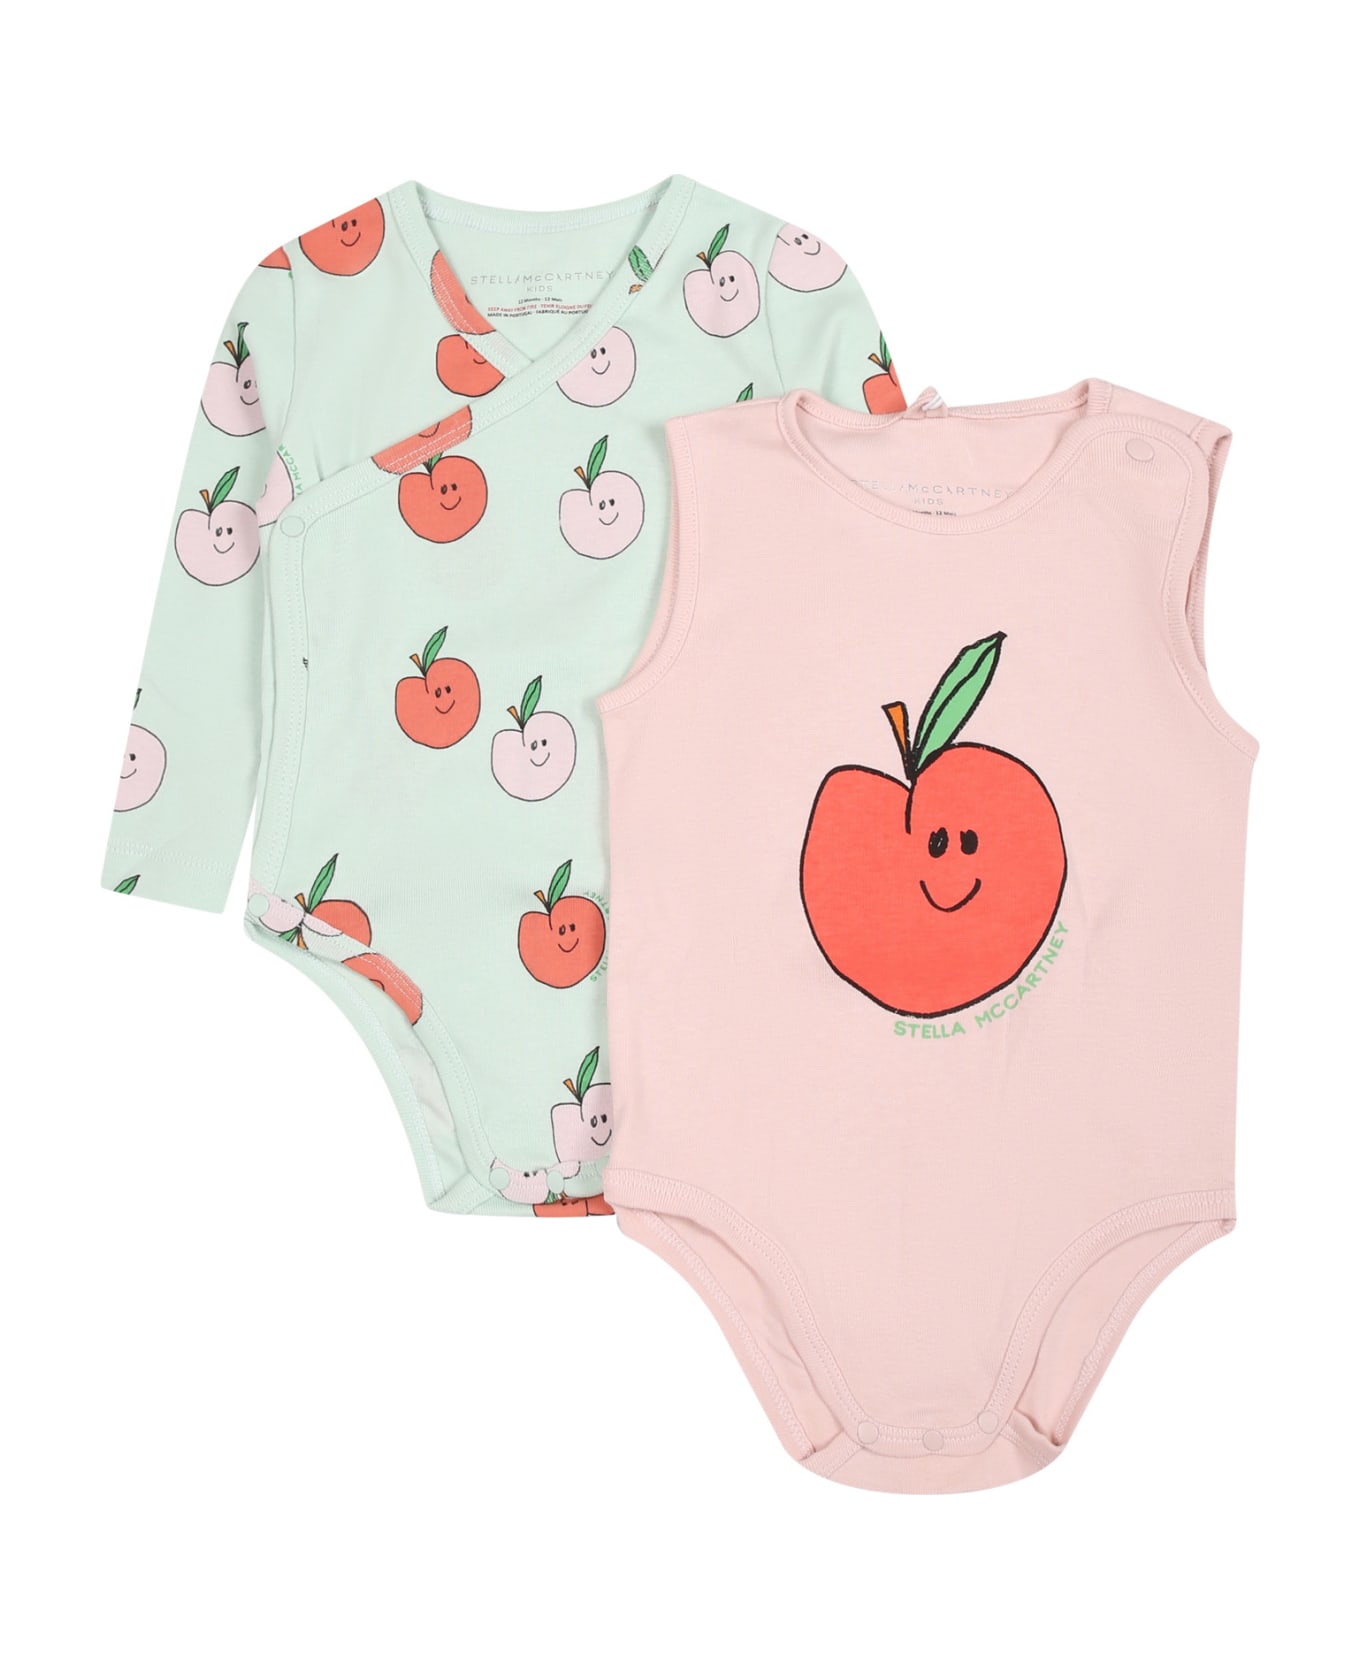 Stella McCartney Kids Multicolor Set For Baby Girl With Apples - Multicolor